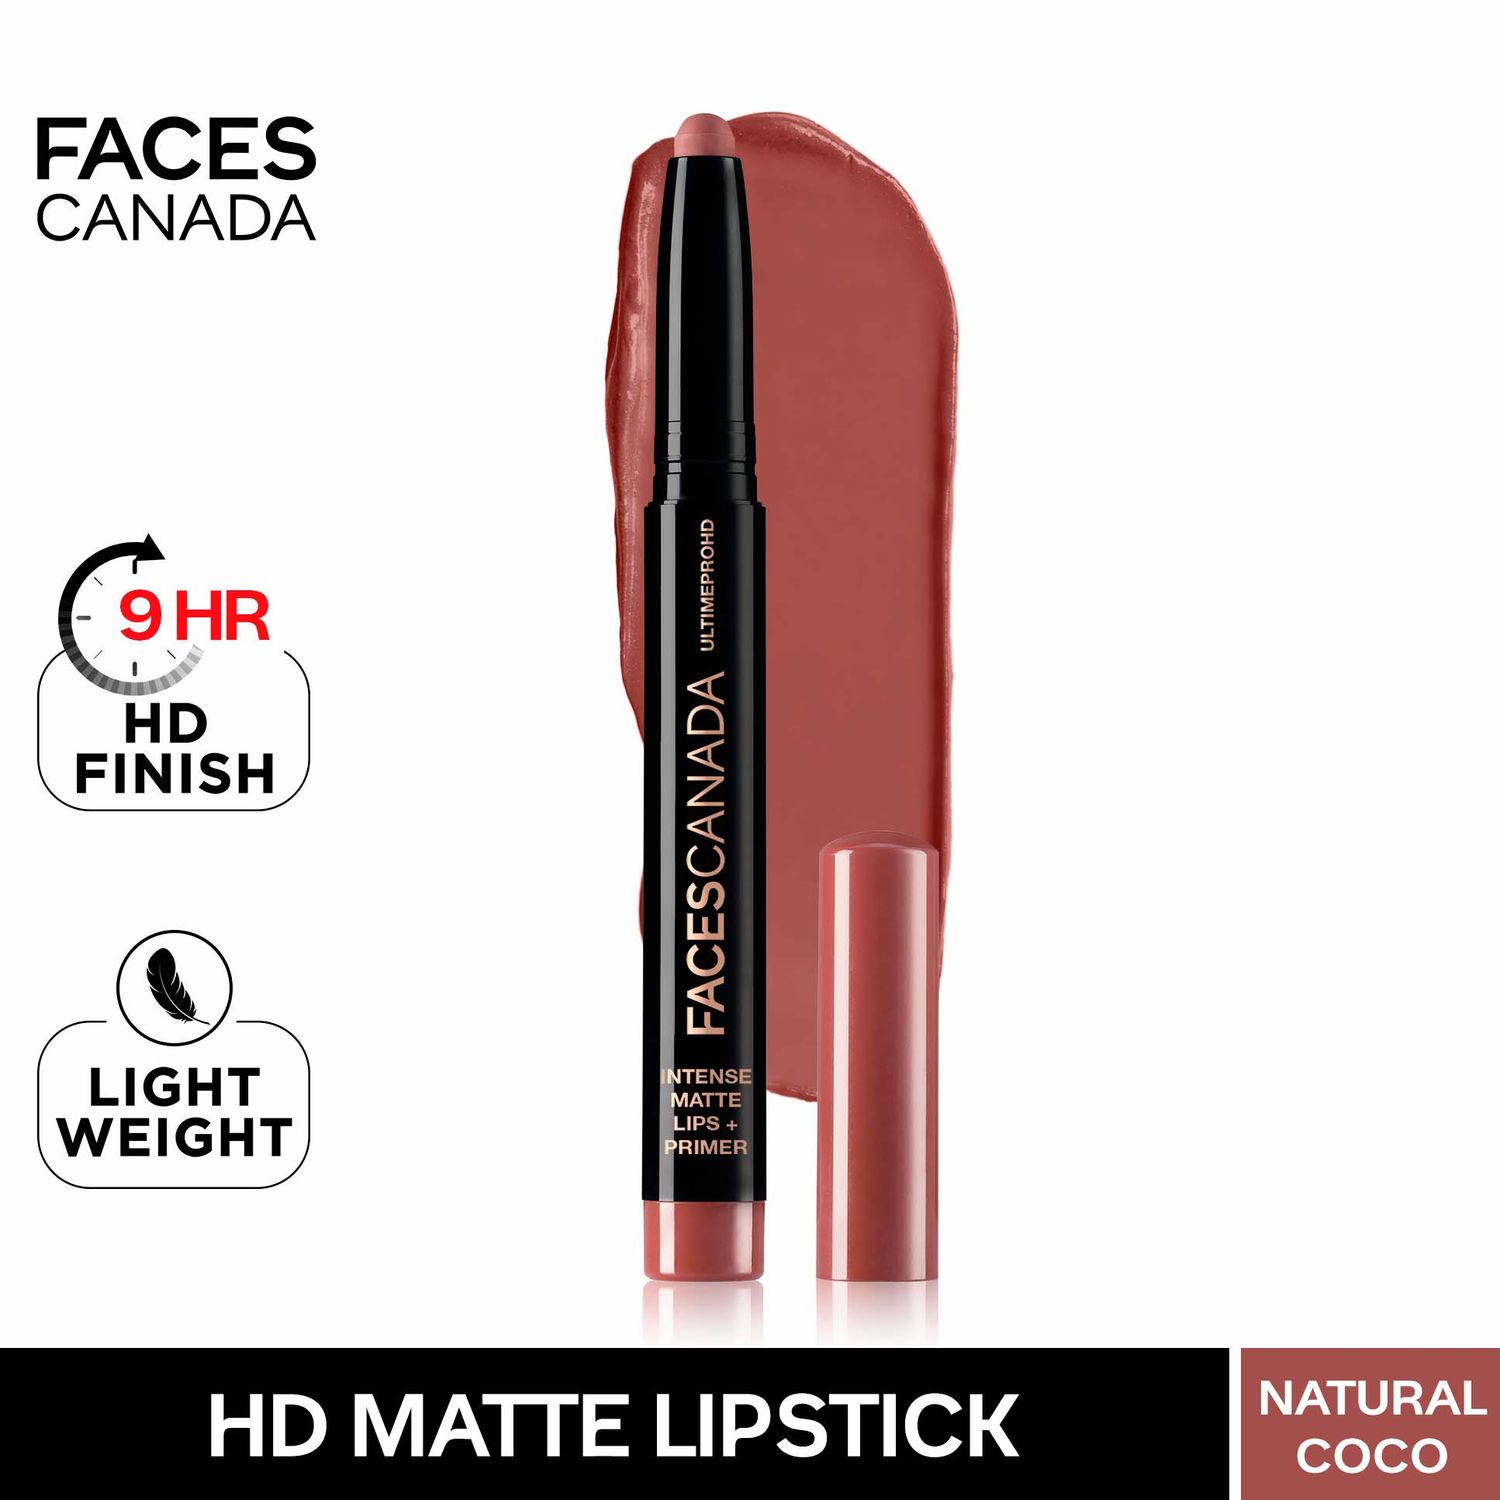 Faces Canada HD Intense Matte Lipstick | Feather light comfort | 10 hrs stay| Primer infused | Flawless HD finish | Made in Germany |Natural Coco 1.4g